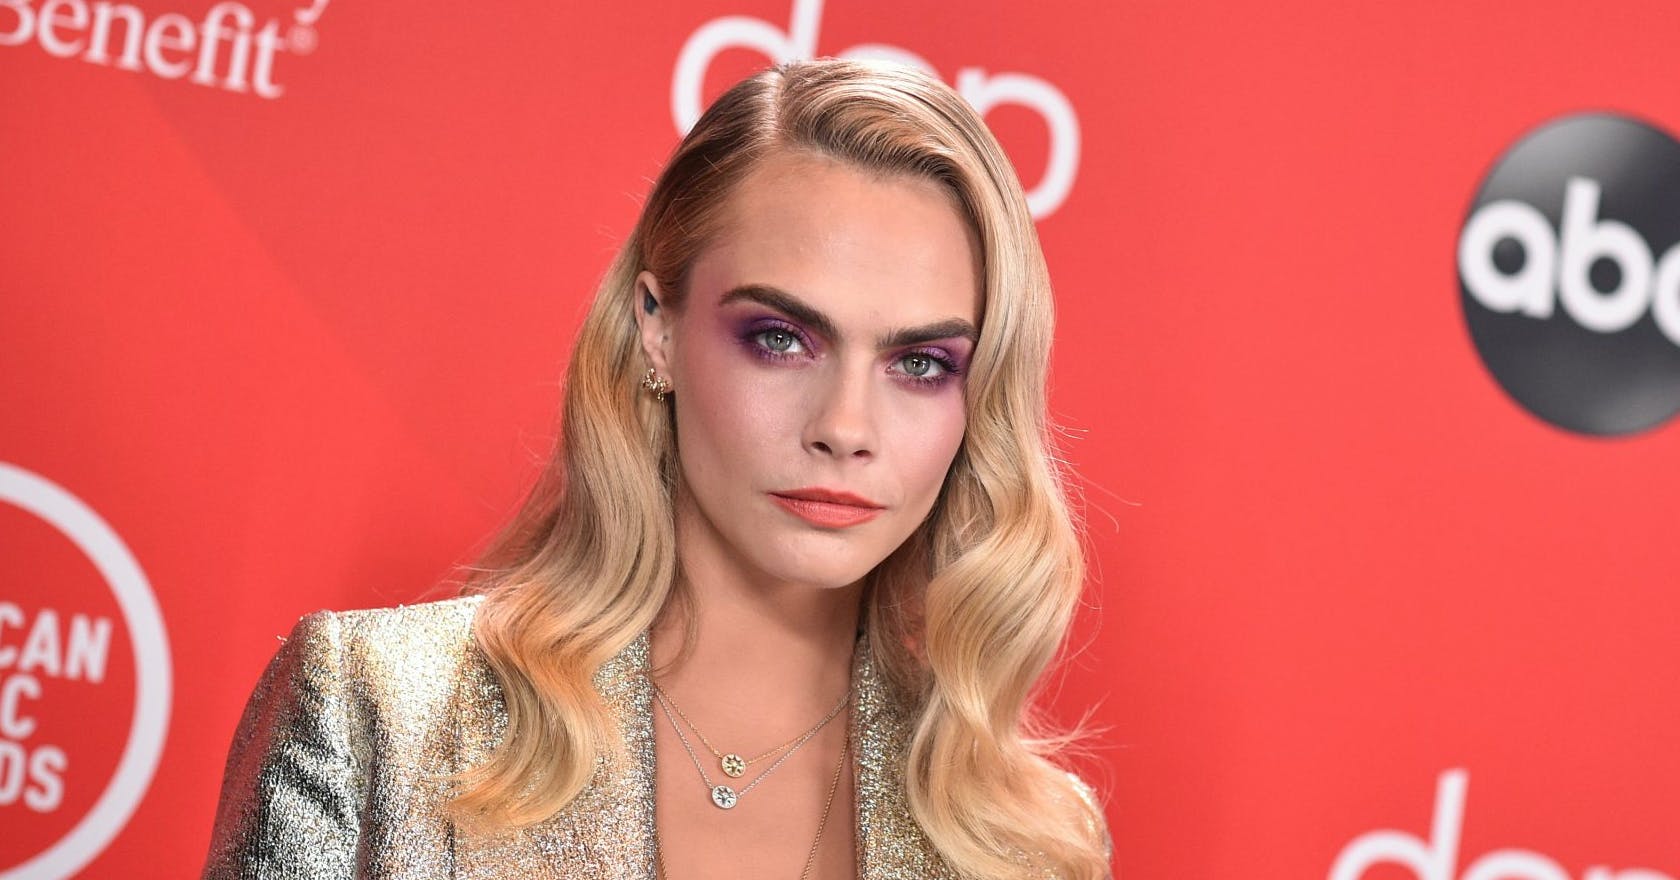 Only Murders In The Building season 2: Cara Delevingne joins cast of Hulu’s murder comedy series